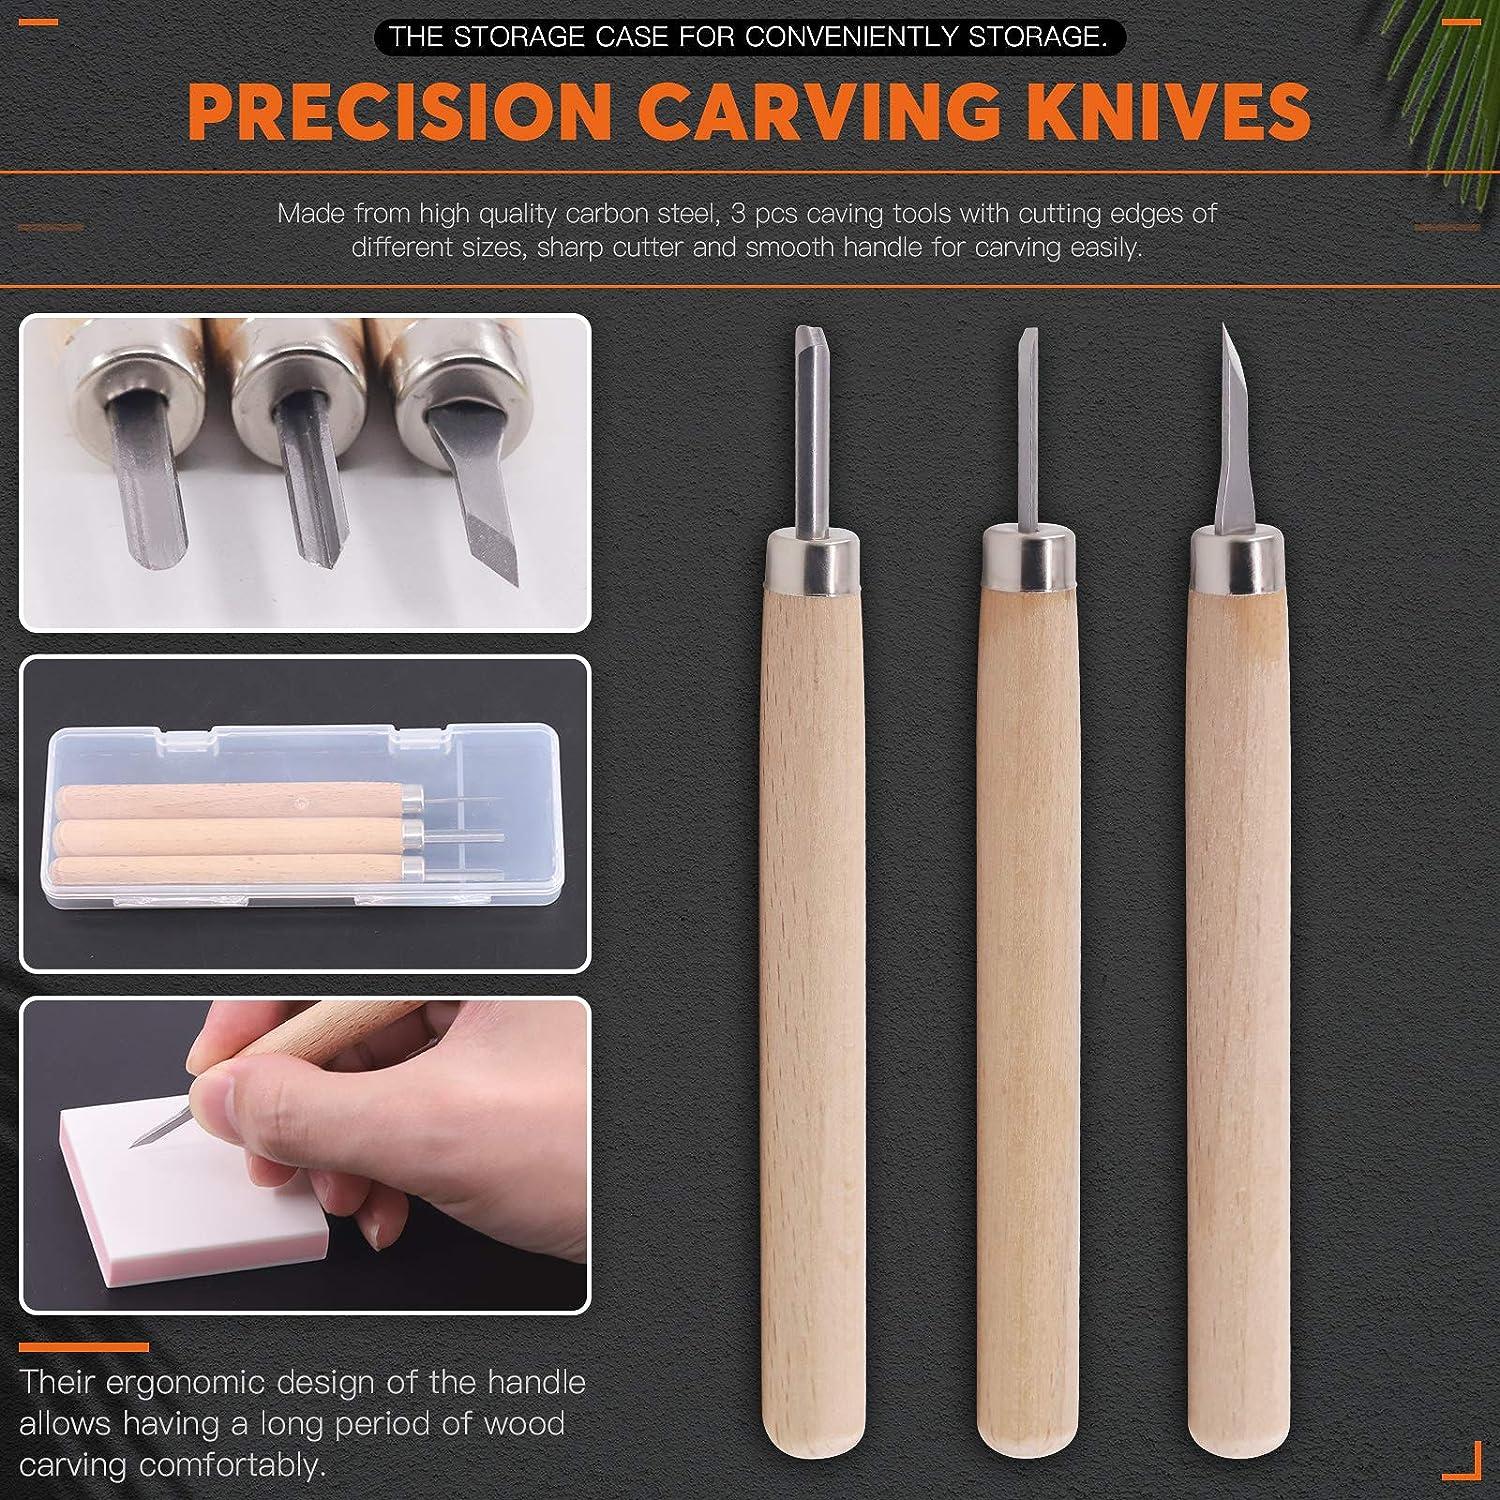 DIY Rubber Stamp Carving Kit Rubber Carving Tools Set For